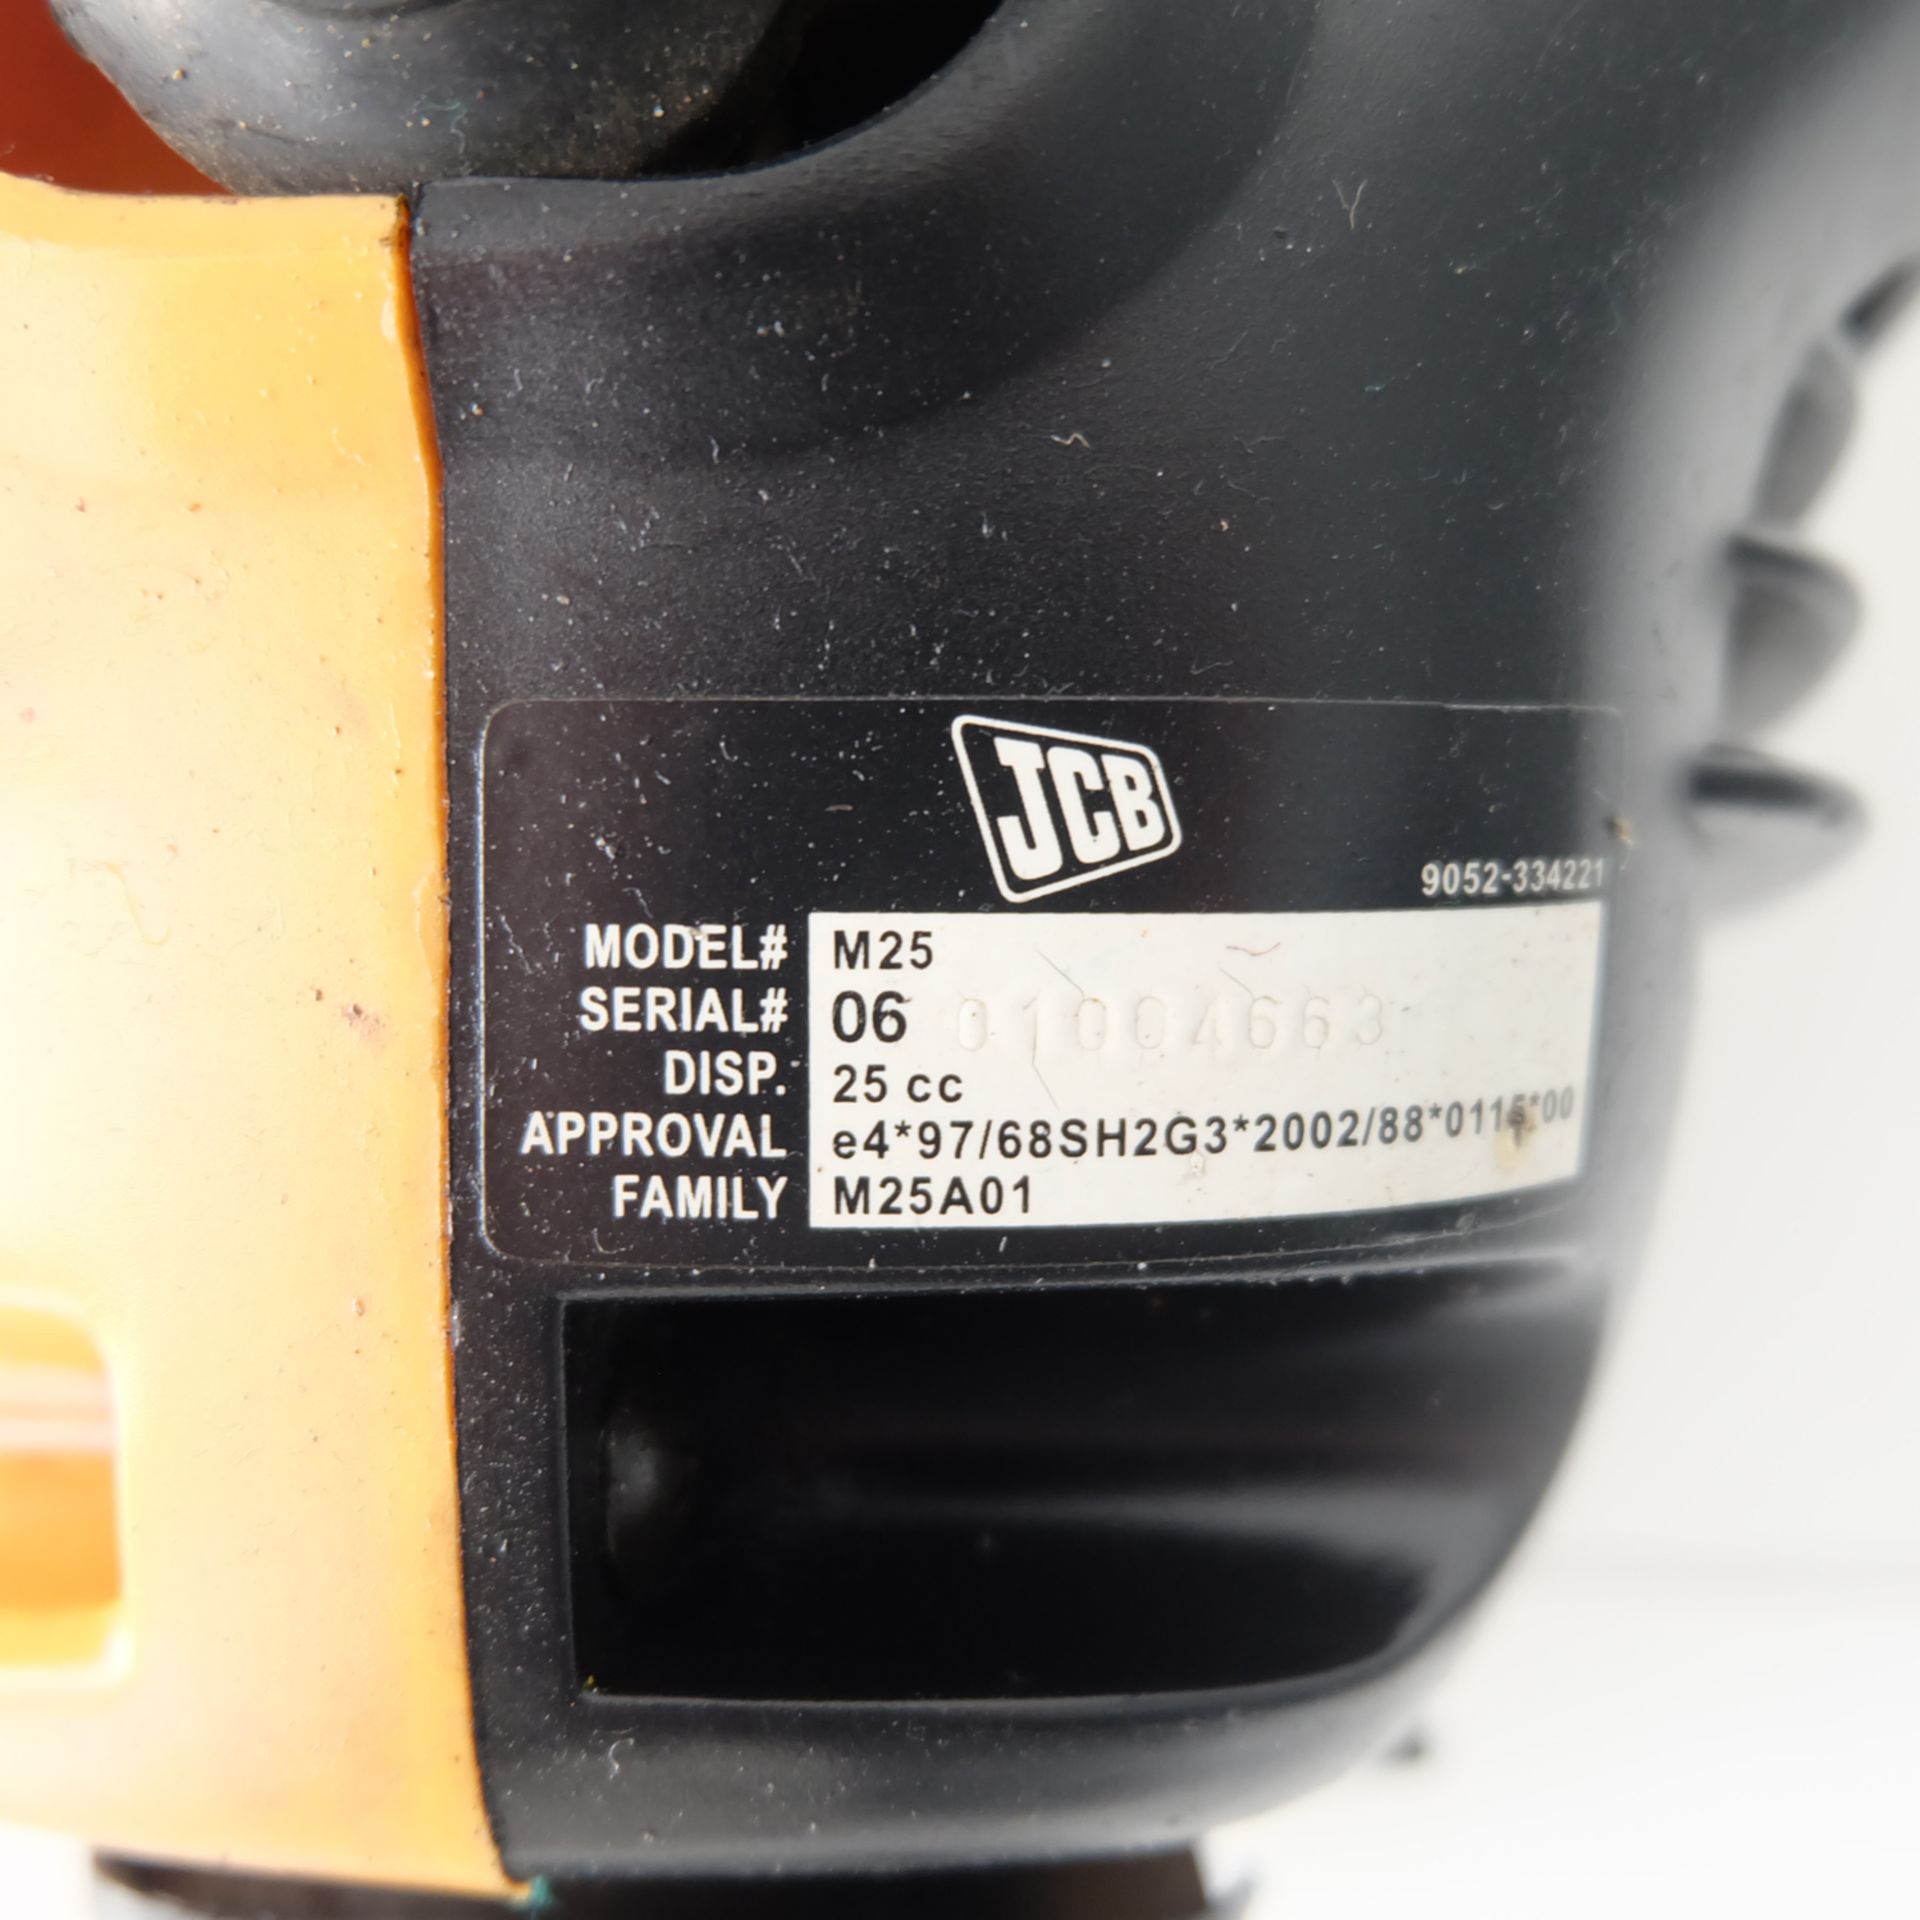 JCB Petrol Powered Strimmer. Rated No Load Speed 11000/Min. - Image 6 of 6